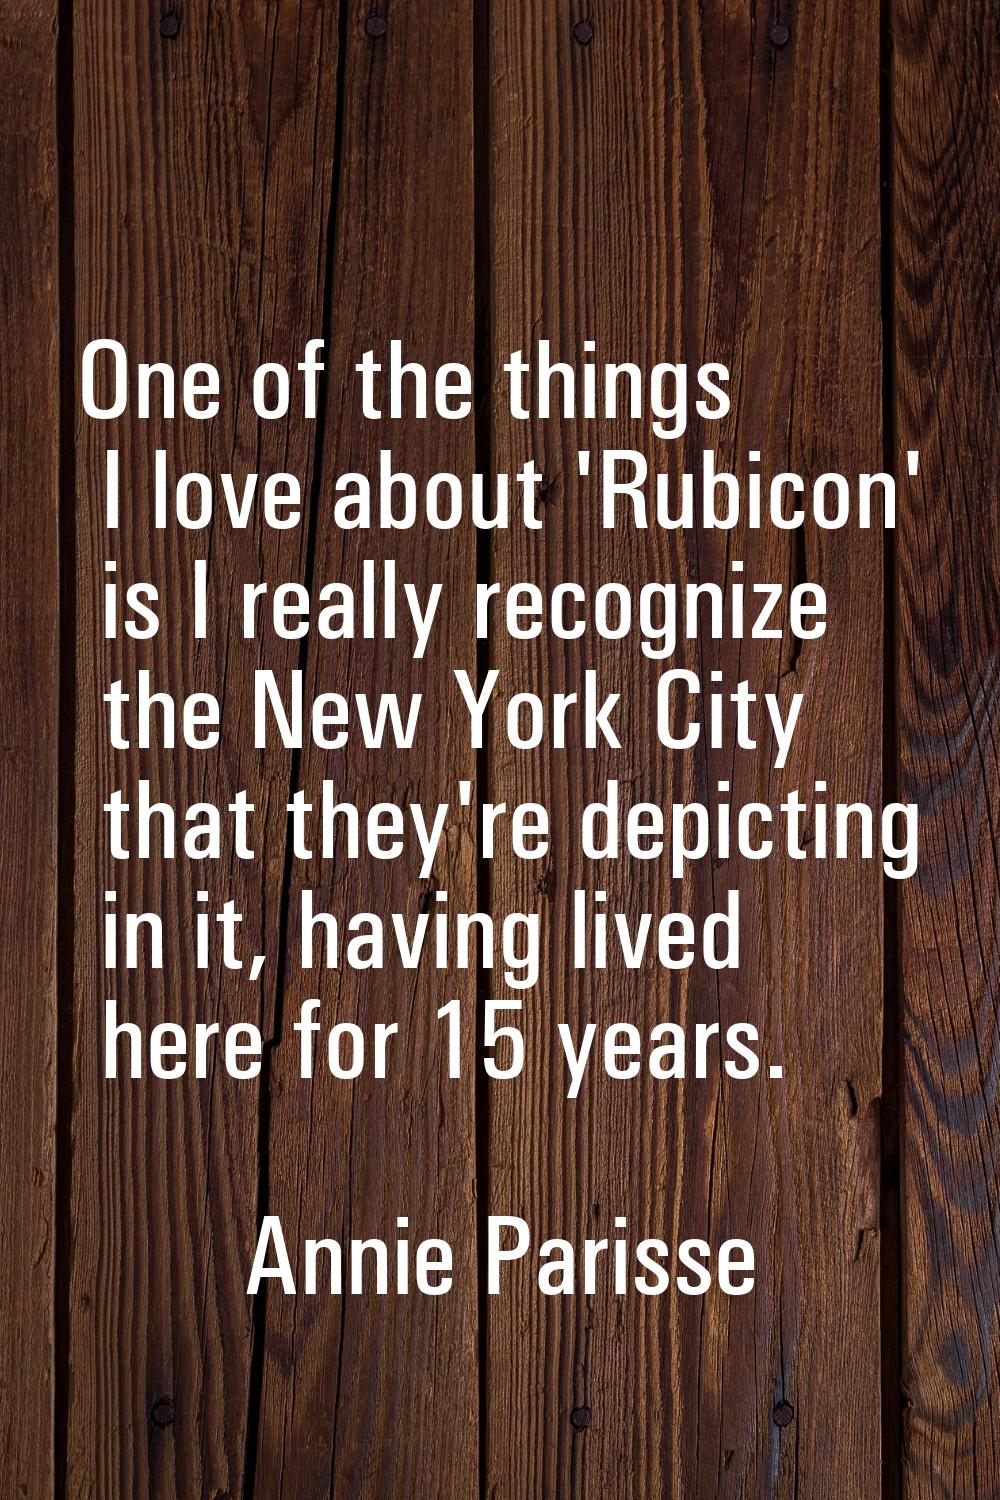 One of the things I love about 'Rubicon' is I really recognize the New York City that they're depic